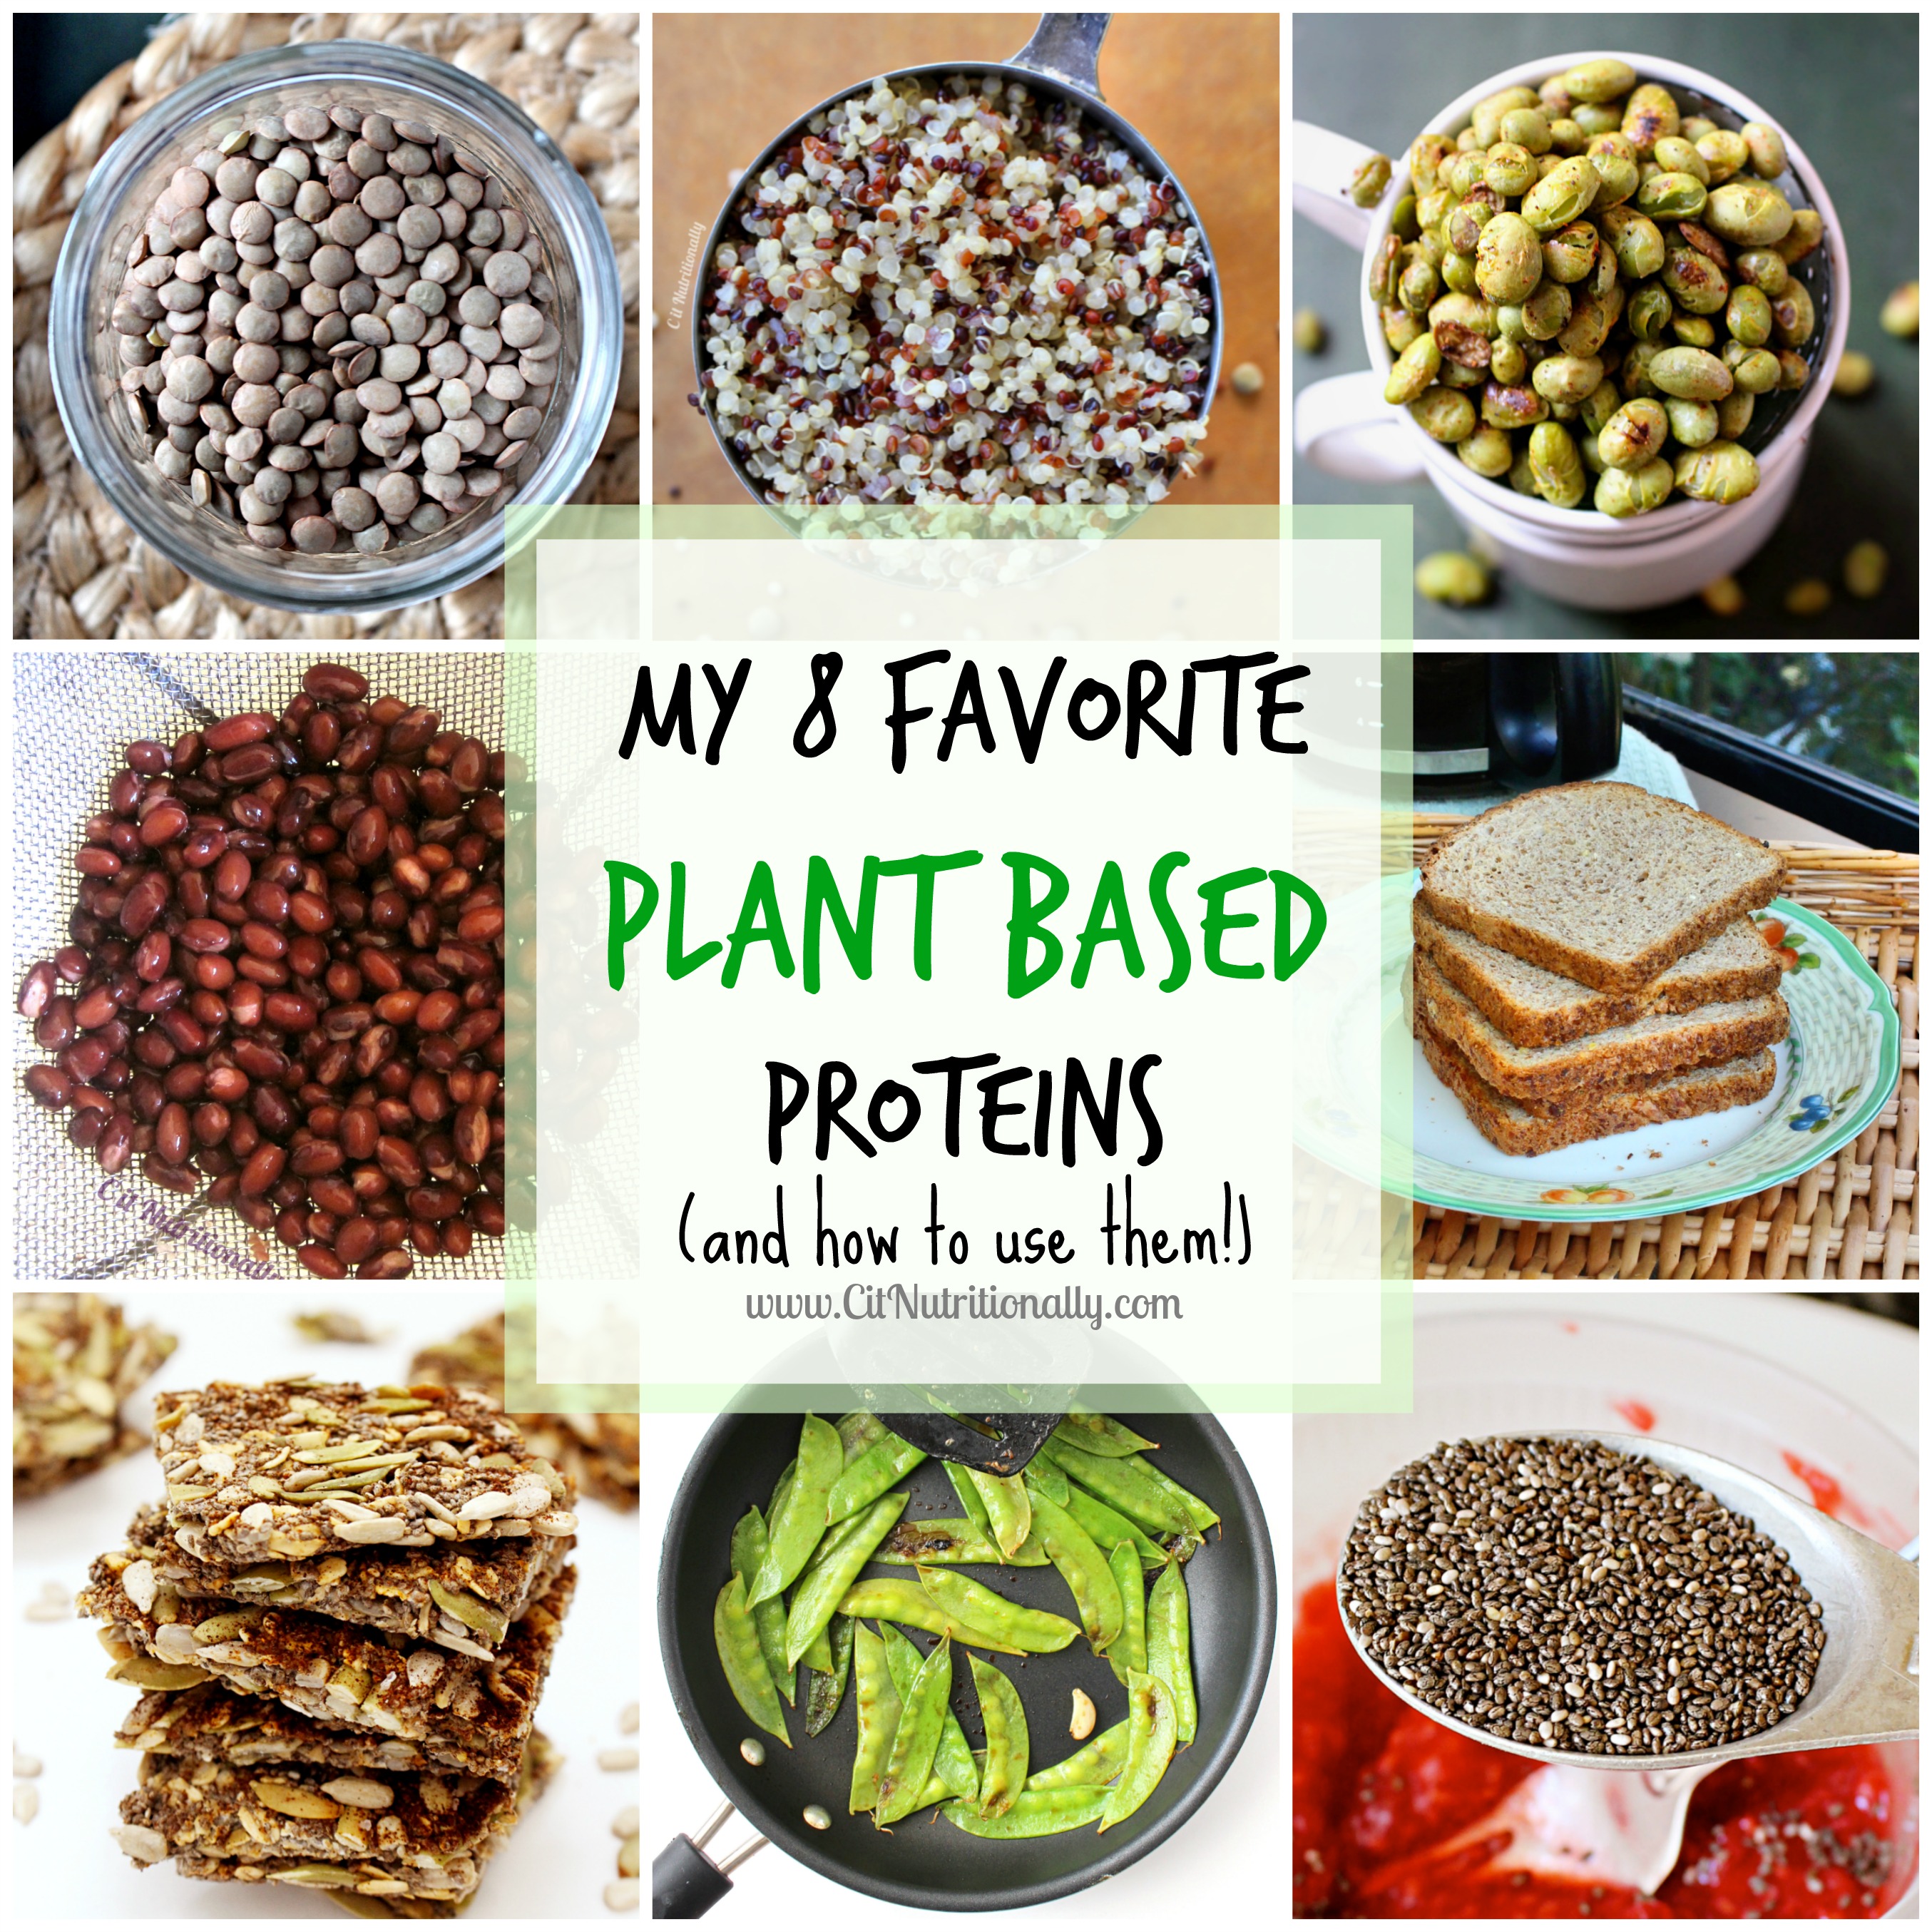 My 8 Favorite Plant Based Proteins and how to use them! | C it Nutritionally #vegan #vegetarian #MeatlessMonday #ShopWithYourHeart